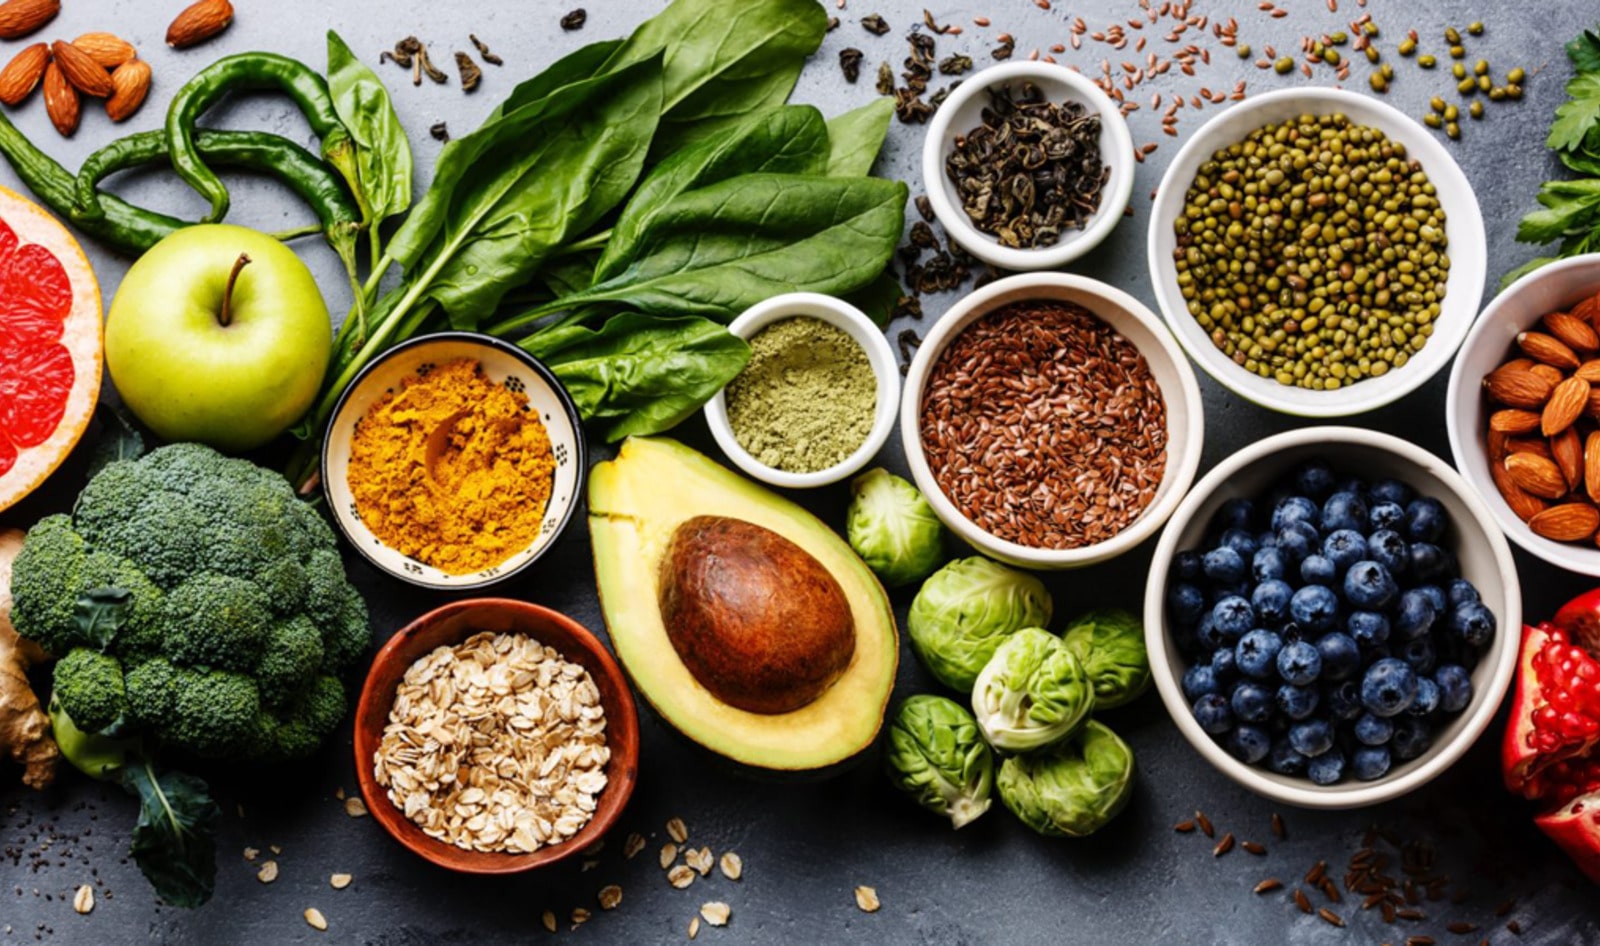 8 Reasons This Physician Recommends You Drop the Keto Diet and Go Vegan&nbsp;